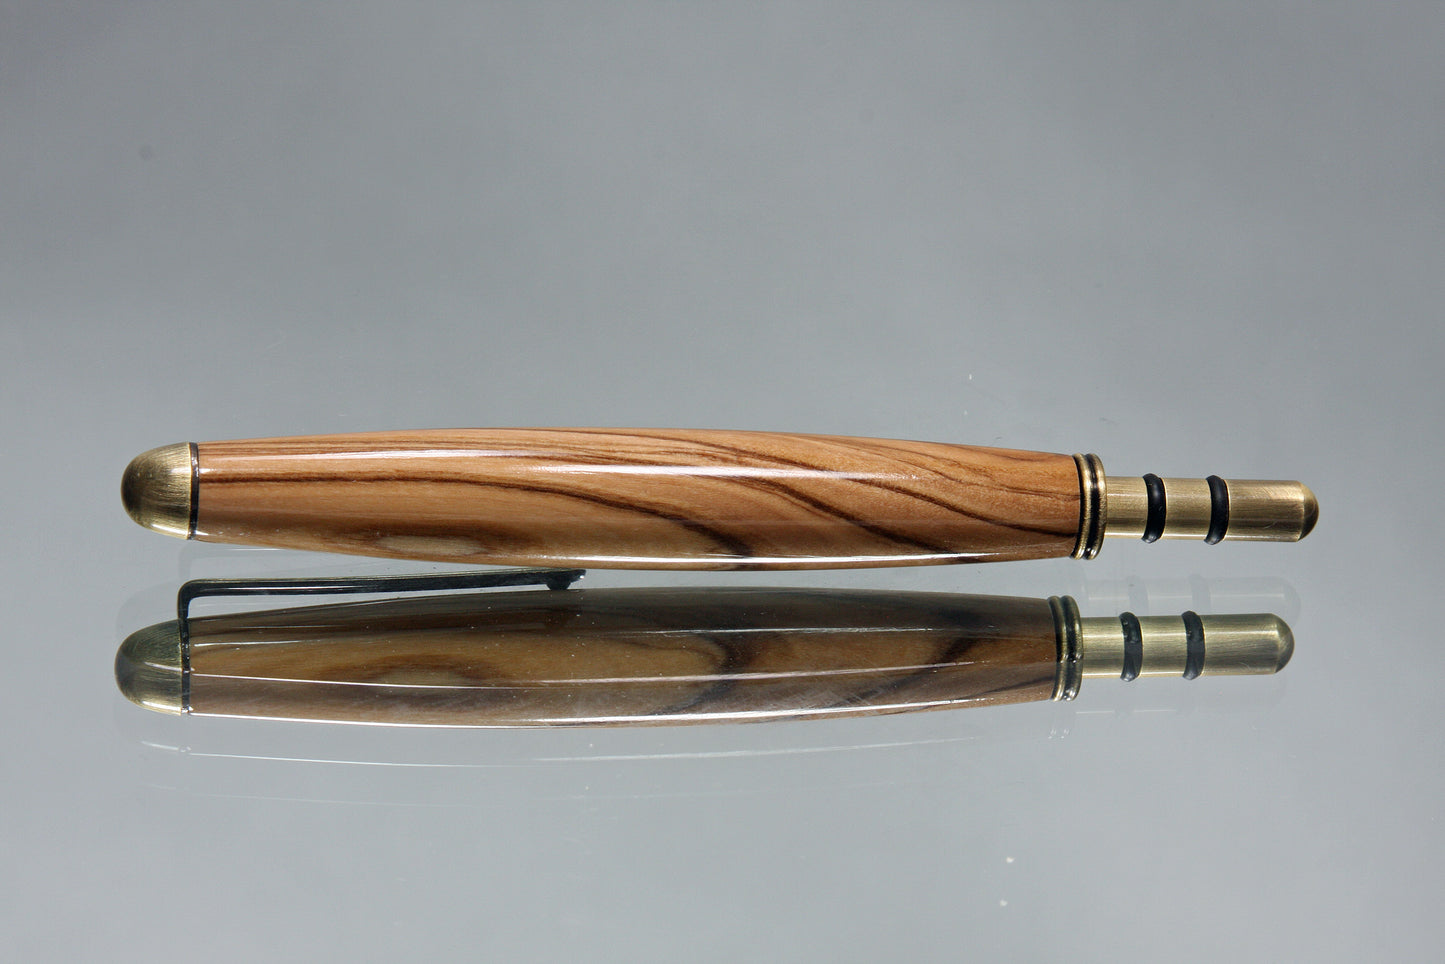 Handcrafted Single-Bladed Seam Ripper - Precision Crafting Tools for Seamstresses and Craft Enthusiasts